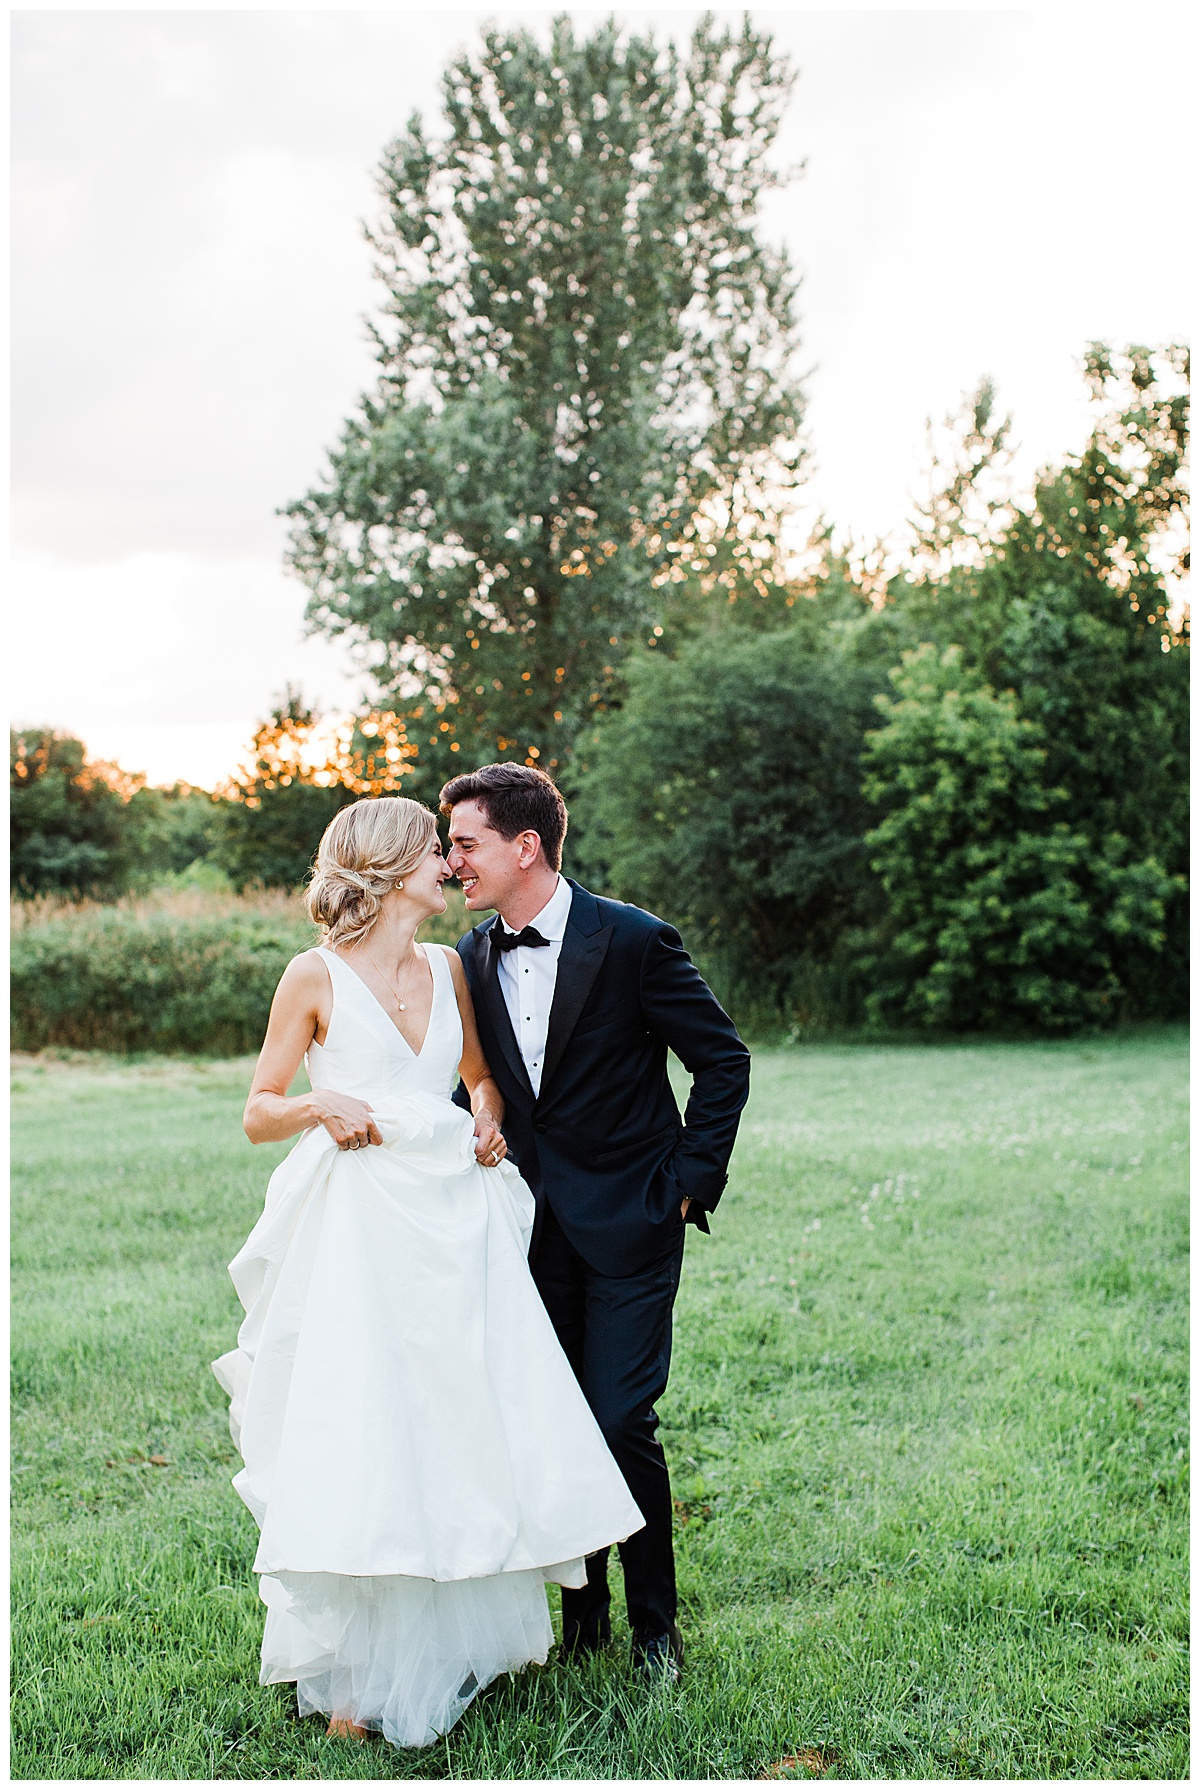 Bride and groom stand in field nuzzling noses at sunset| Ontario wedding| Toronto wedding photographer| 3photography